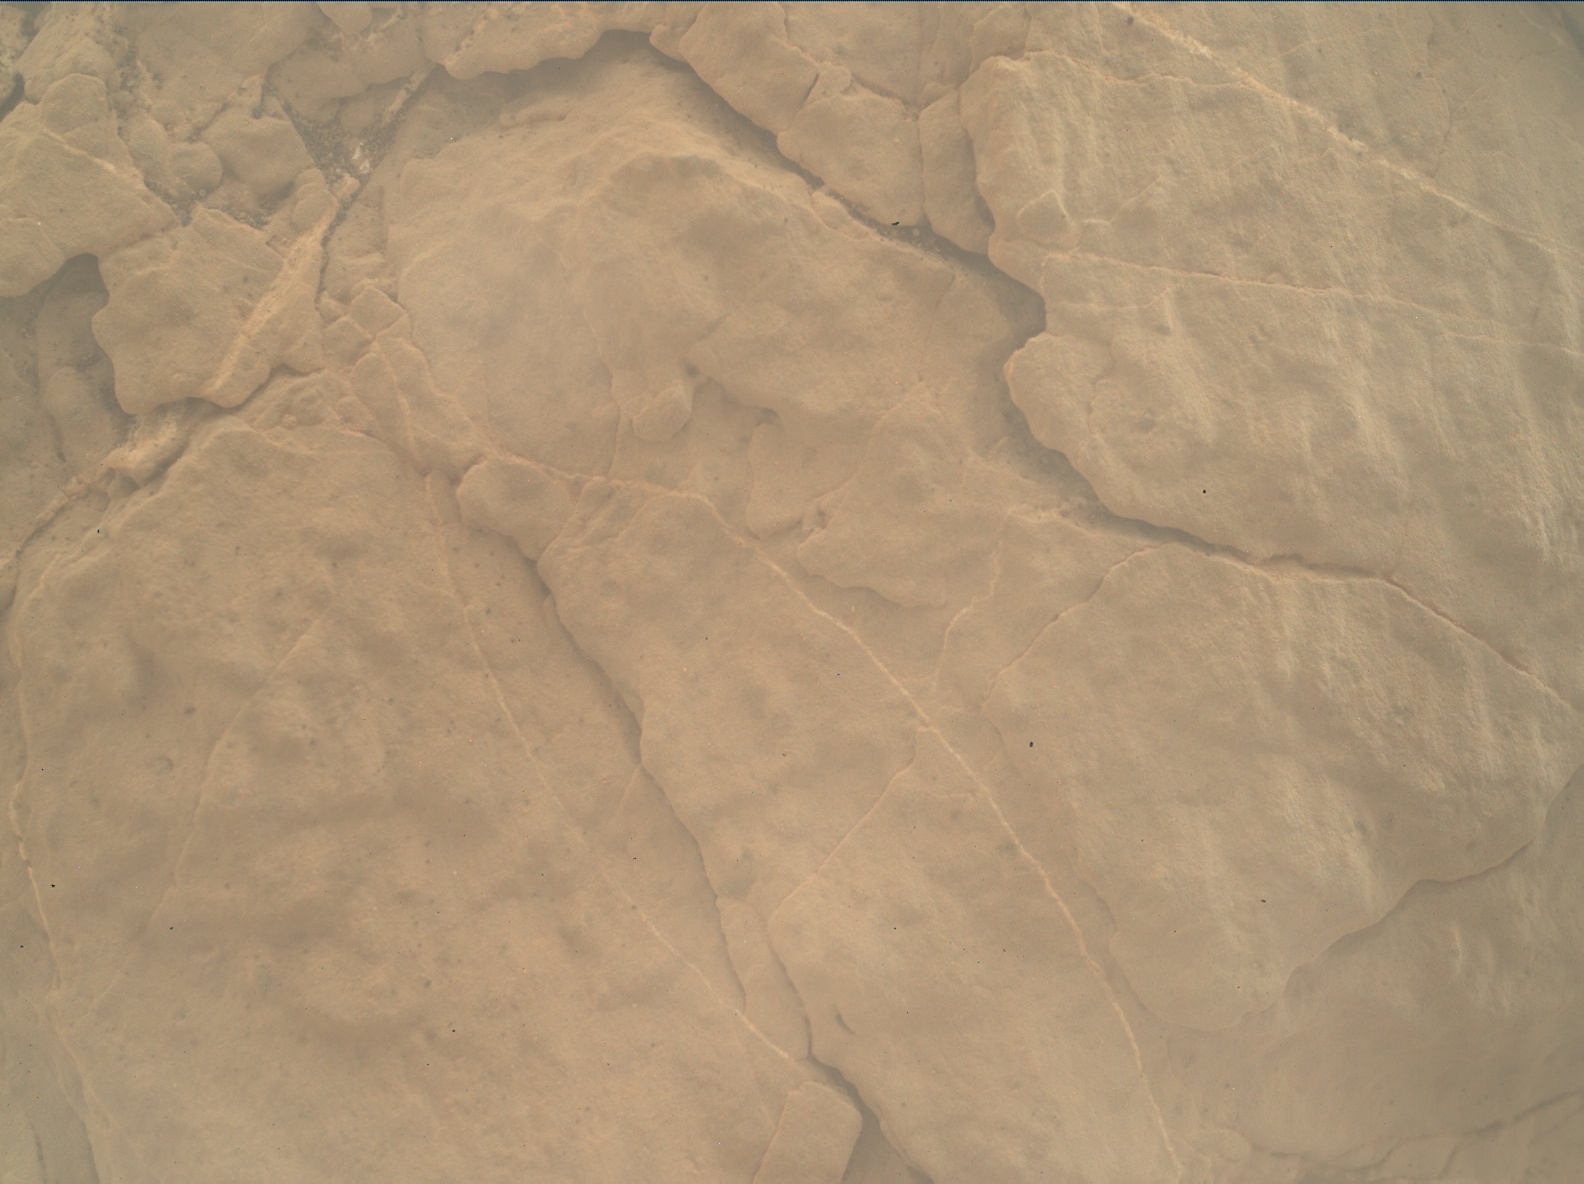 Nasa's Mars rover Curiosity acquired this image using its Mars Hand Lens Imager (MAHLI) on Sol 2653